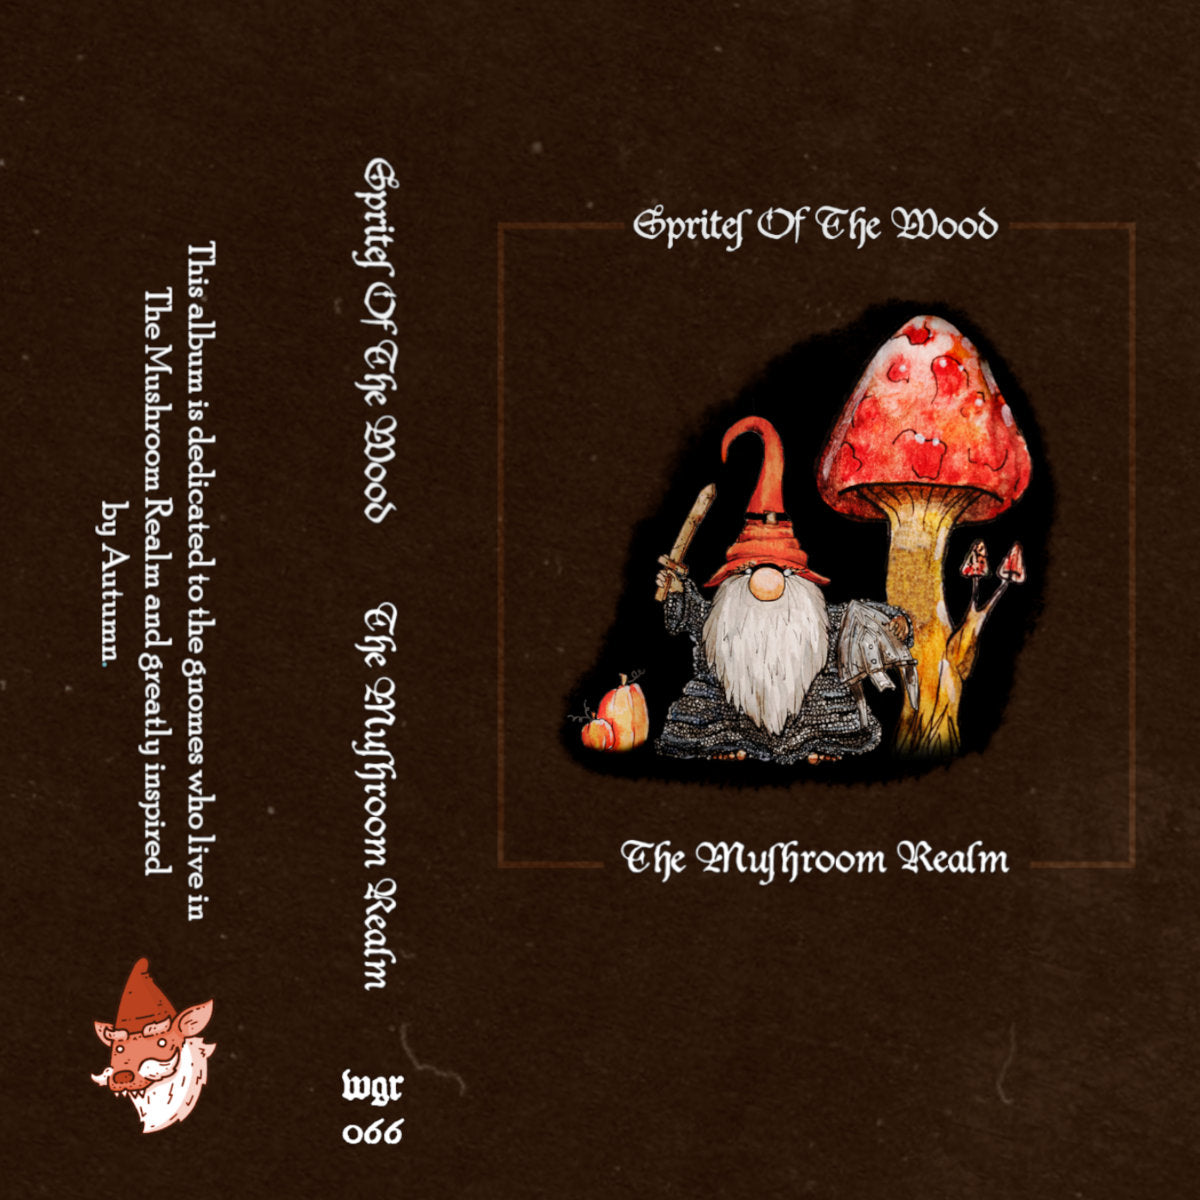 [SOLD OUT] SPRITES OF THE WOOD "Mushroom Realm" cassette tape (lim.50)